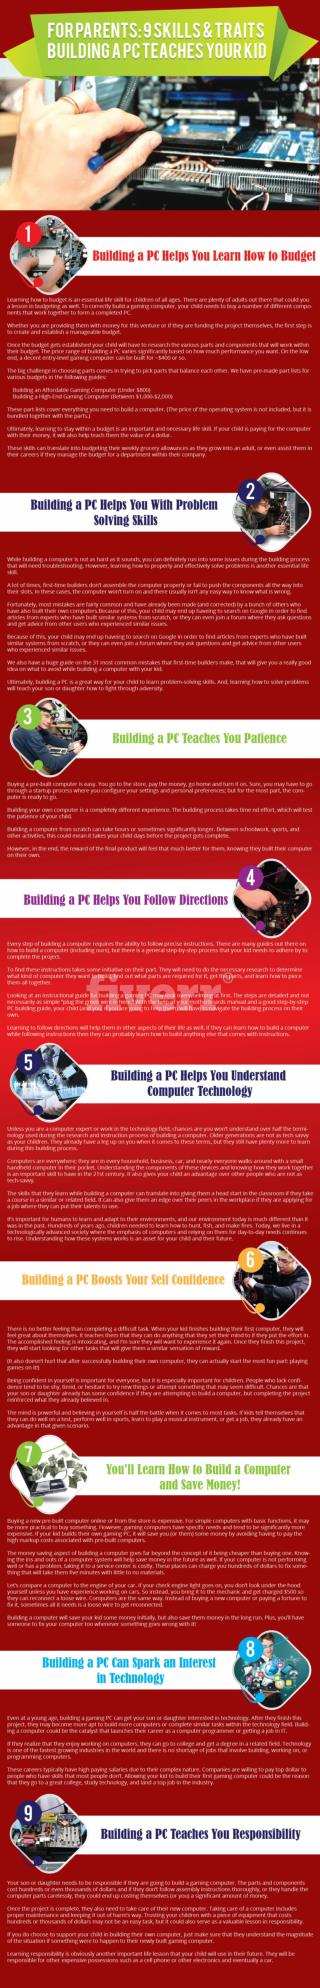 9 Skills & Traits Building a PC Teaches Your Kid